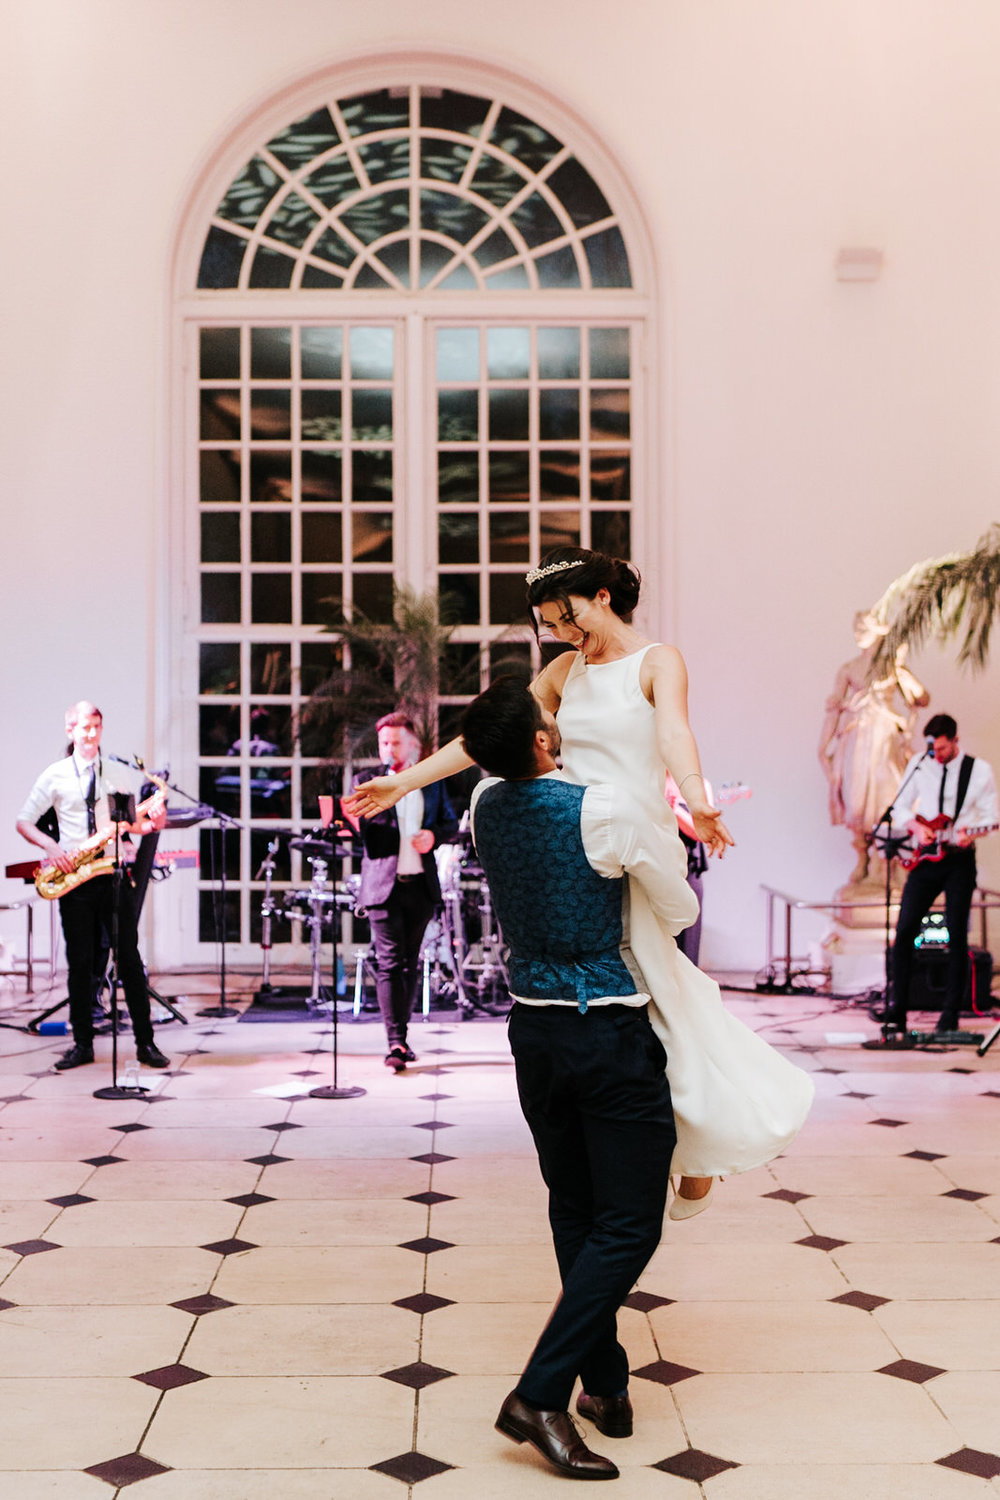  Groom lifts bride up and swings her around during first dance at Kew Gardens Nash Conservatory Wedding 